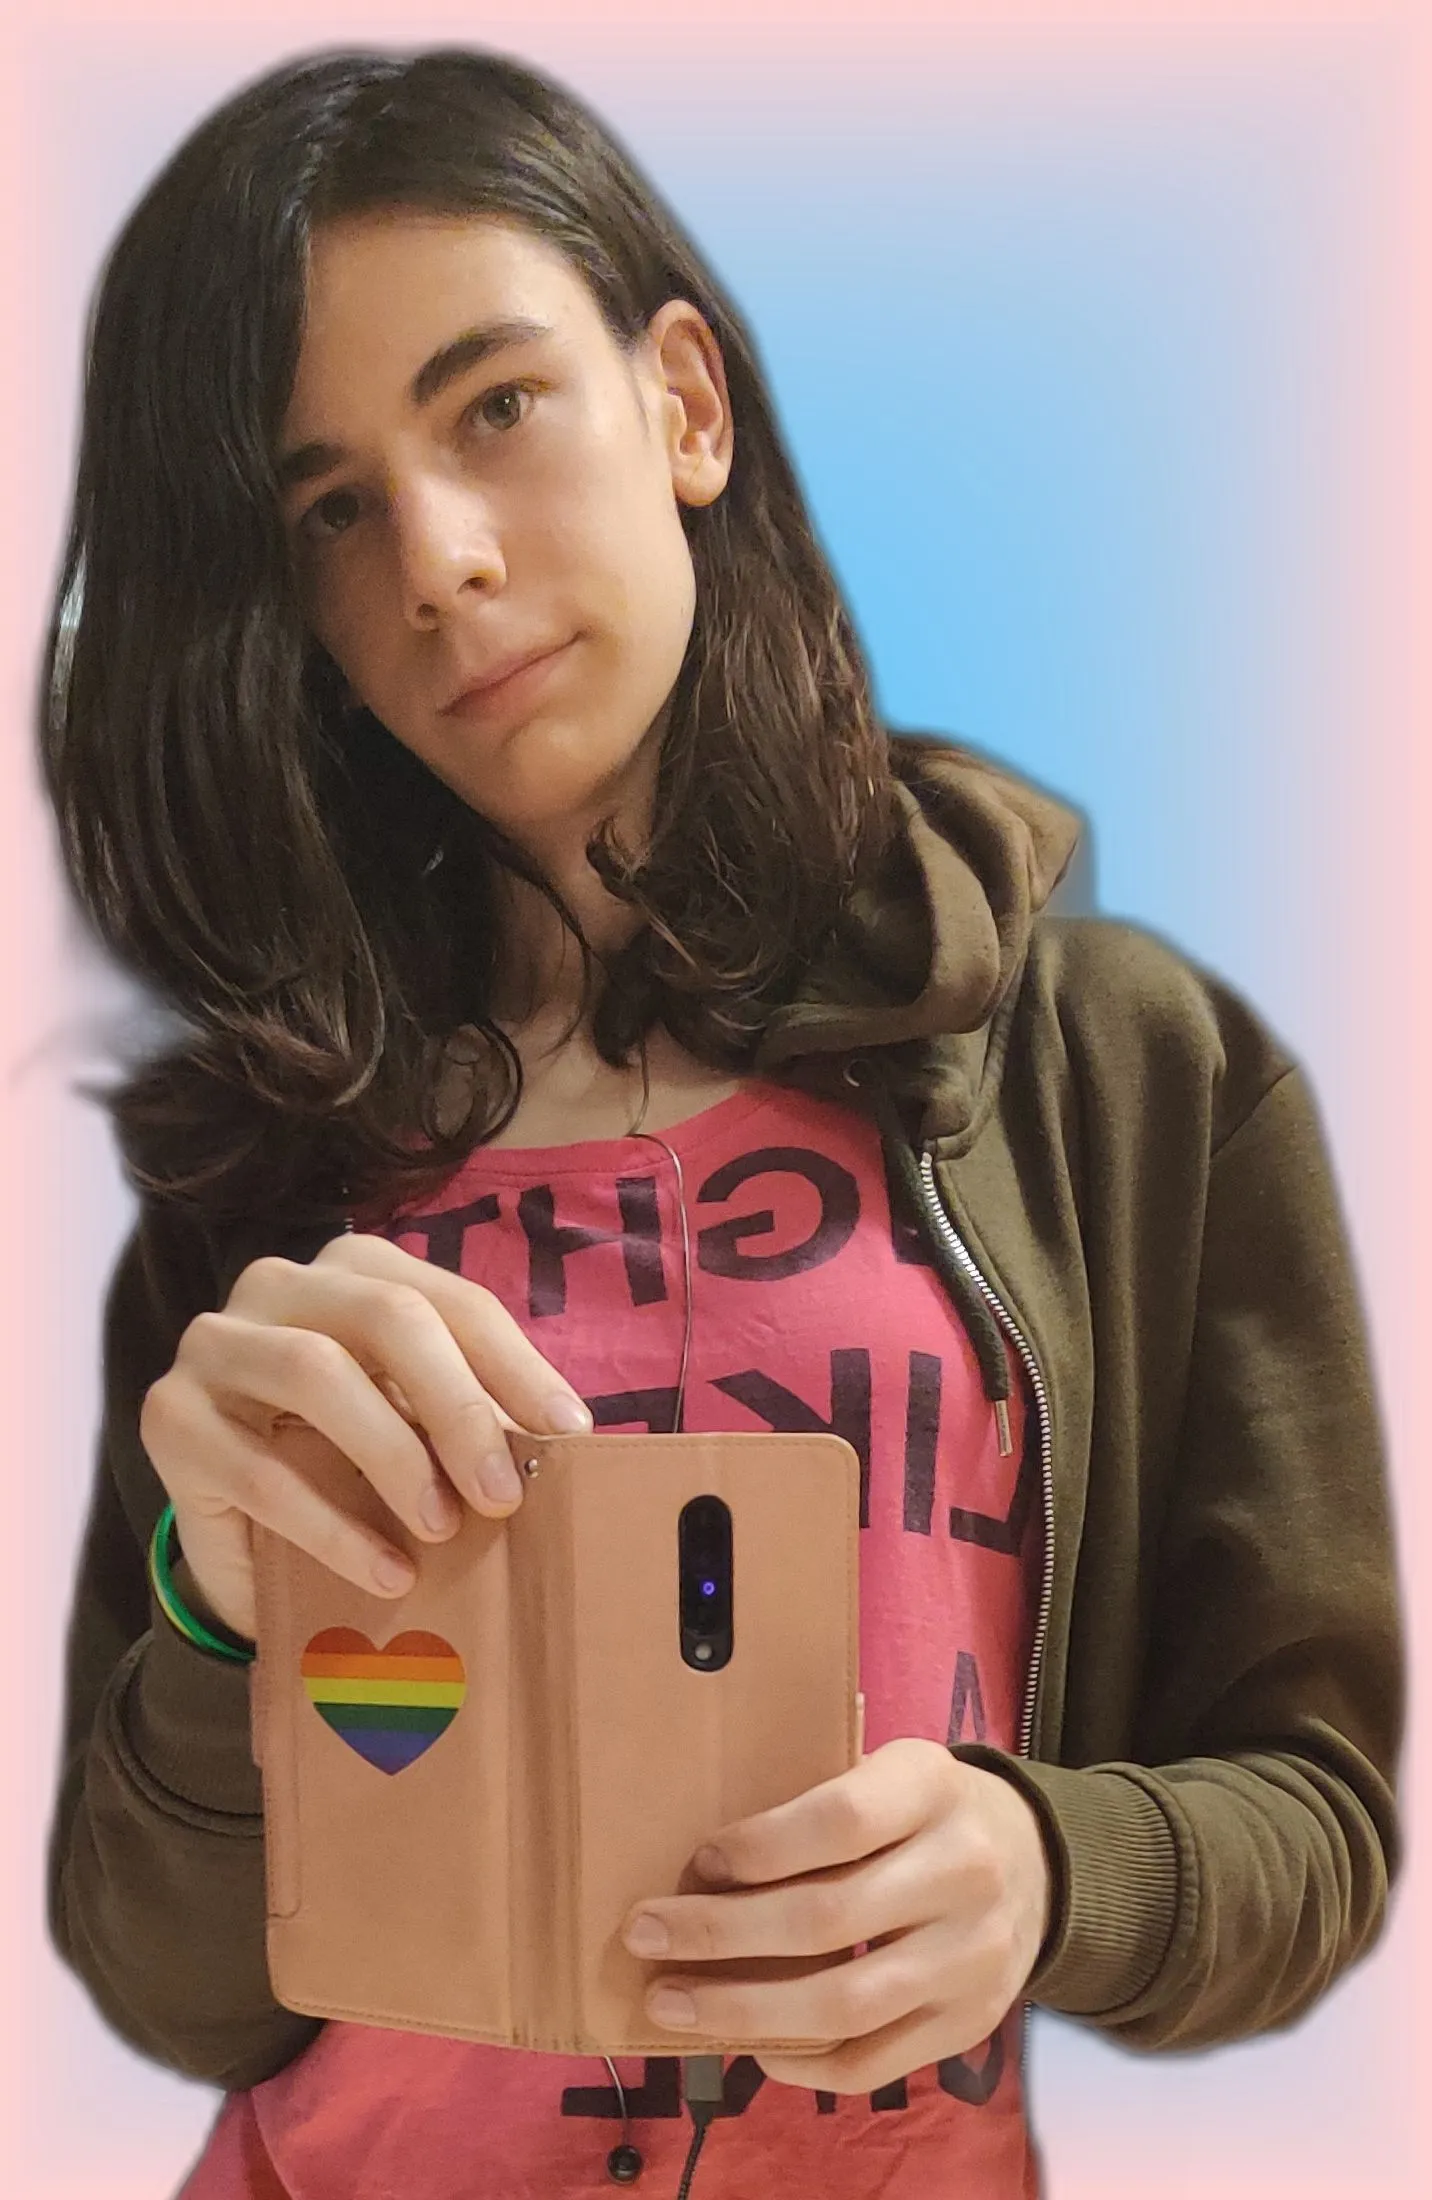 Photo of me holding my phone with a rainbow heart on it. I'm wearing a T-shirt that says 'fight like a girl'